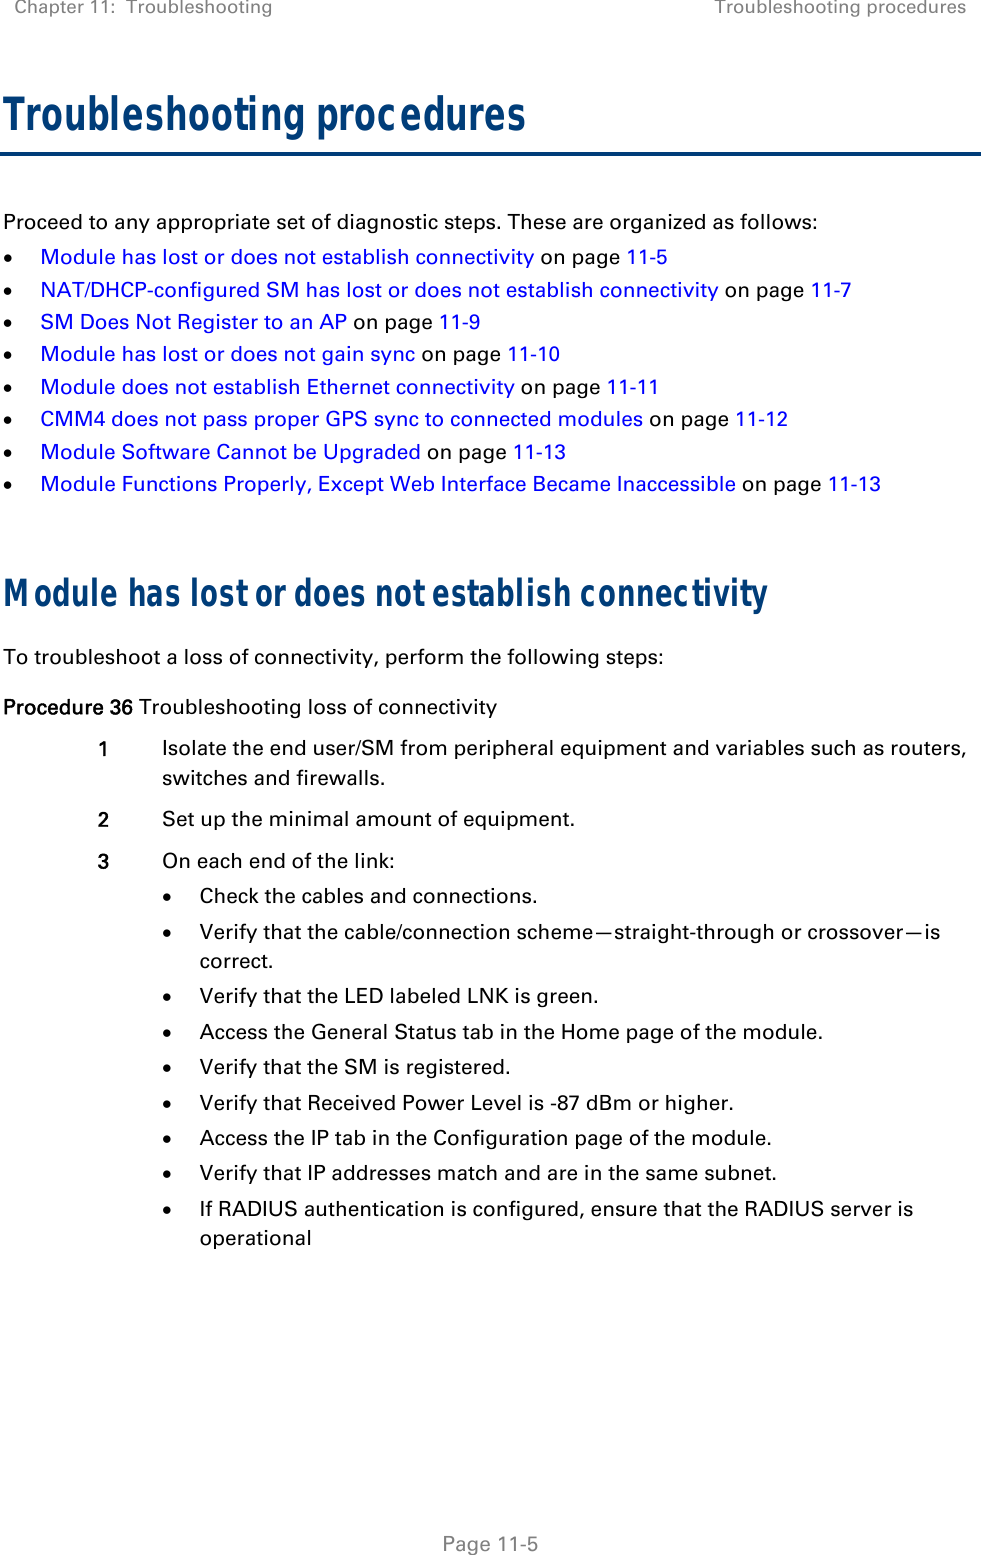 Chapter 11:  Troubleshooting  Troubleshooting procedures   Page 11-5 Troubleshooting procedures Proceed to any appropriate set of diagnostic steps. These are organized as follows:  Module has lost or does not establish connectivity on page 11-5  NAT/DHCP-configured SM has lost or does not establish connectivity on page 11-7  SM Does Not Register to an AP on page 11-9  Module has lost or does not gain sync on page 11-10  Module does not establish Ethernet connectivity on page 11-11  CMM4 does not pass proper GPS sync to connected modules on page 11-12  Module Software Cannot be Upgraded on page 11-13  Module Functions Properly, Except Web Interface Became Inaccessible on page 11-13  Module has lost or does not establish connectivity To troubleshoot a loss of connectivity, perform the following steps: Procedure 36 Troubleshooting loss of connectivity 1  Isolate the end user/SM from peripheral equipment and variables such as routers, switches and firewalls.  2  Set up the minimal amount of equipment. 3  On each end of the link:  Check the cables and connections.  Verify that the cable/connection scheme—straight-through or crossover—is correct.  Verify that the LED labeled LNK is green.  Access the General Status tab in the Home page of the module.  Verify that the SM is registered.  Verify that Received Power Level is -87 dBm or higher.  Access the IP tab in the Configuration page of the module.  Verify that IP addresses match and are in the same subnet.  If RADIUS authentication is configured, ensure that the RADIUS server is operational  